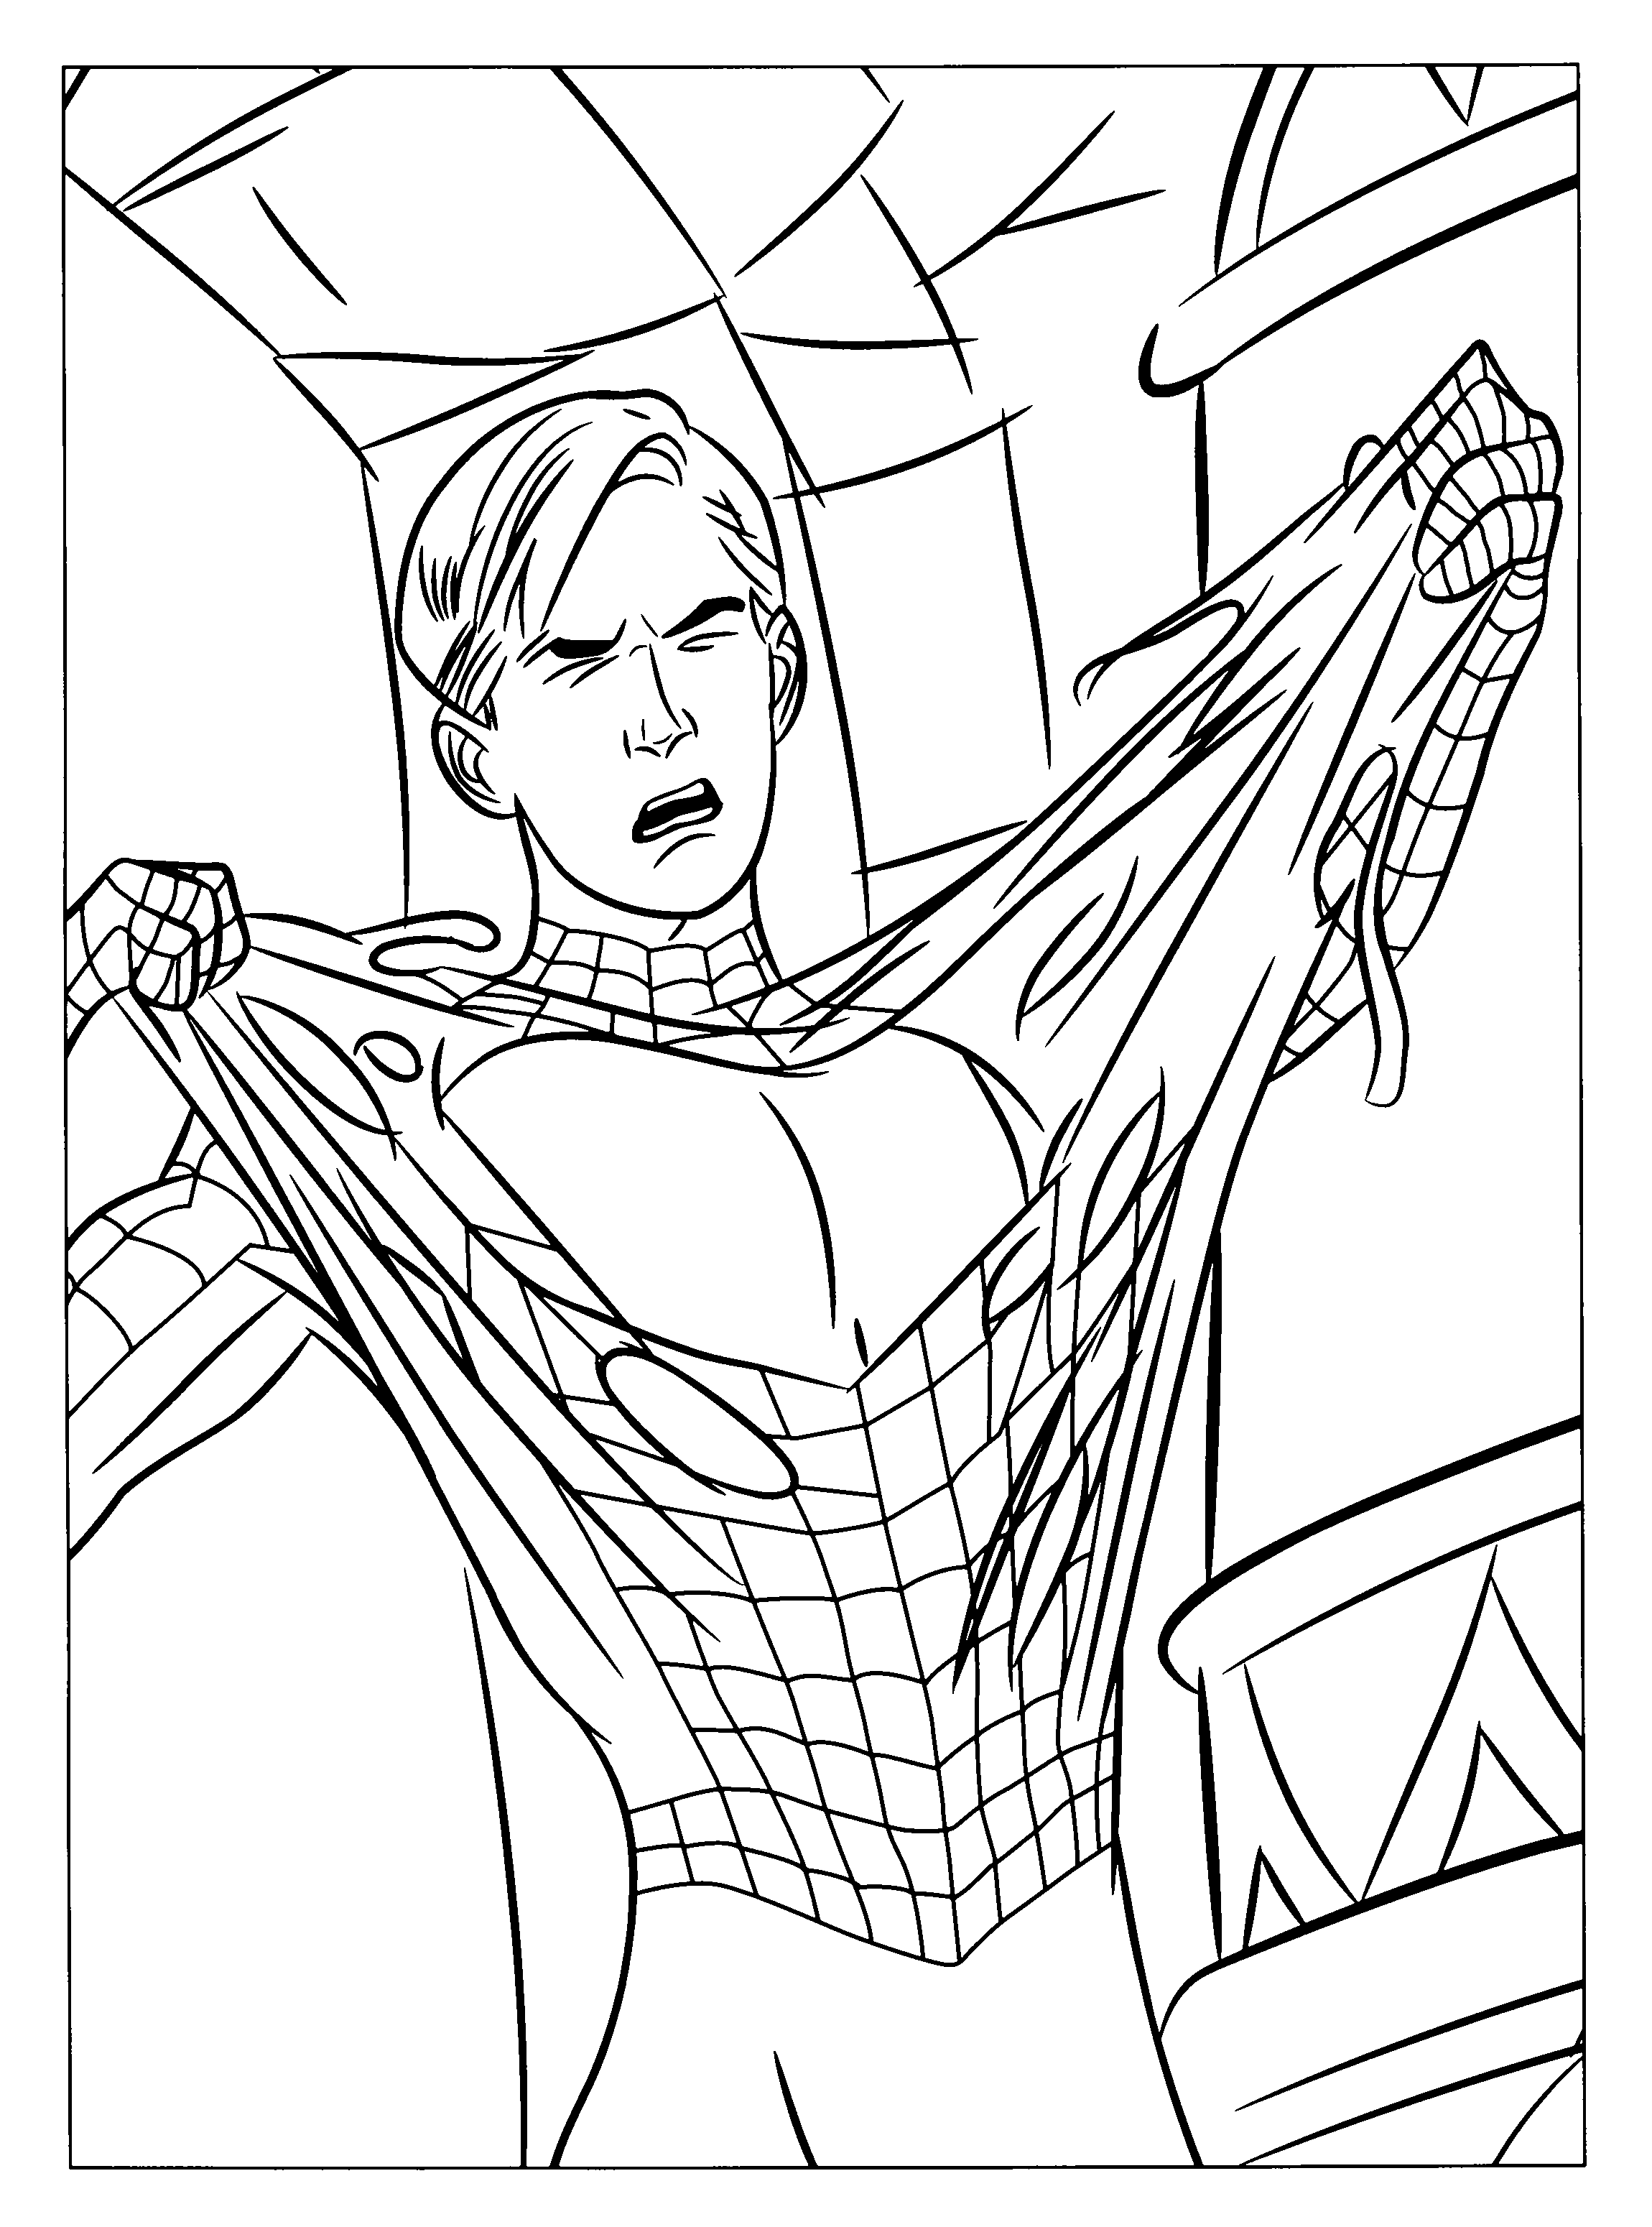 animated-coloring-pages-spider-man-image-0107